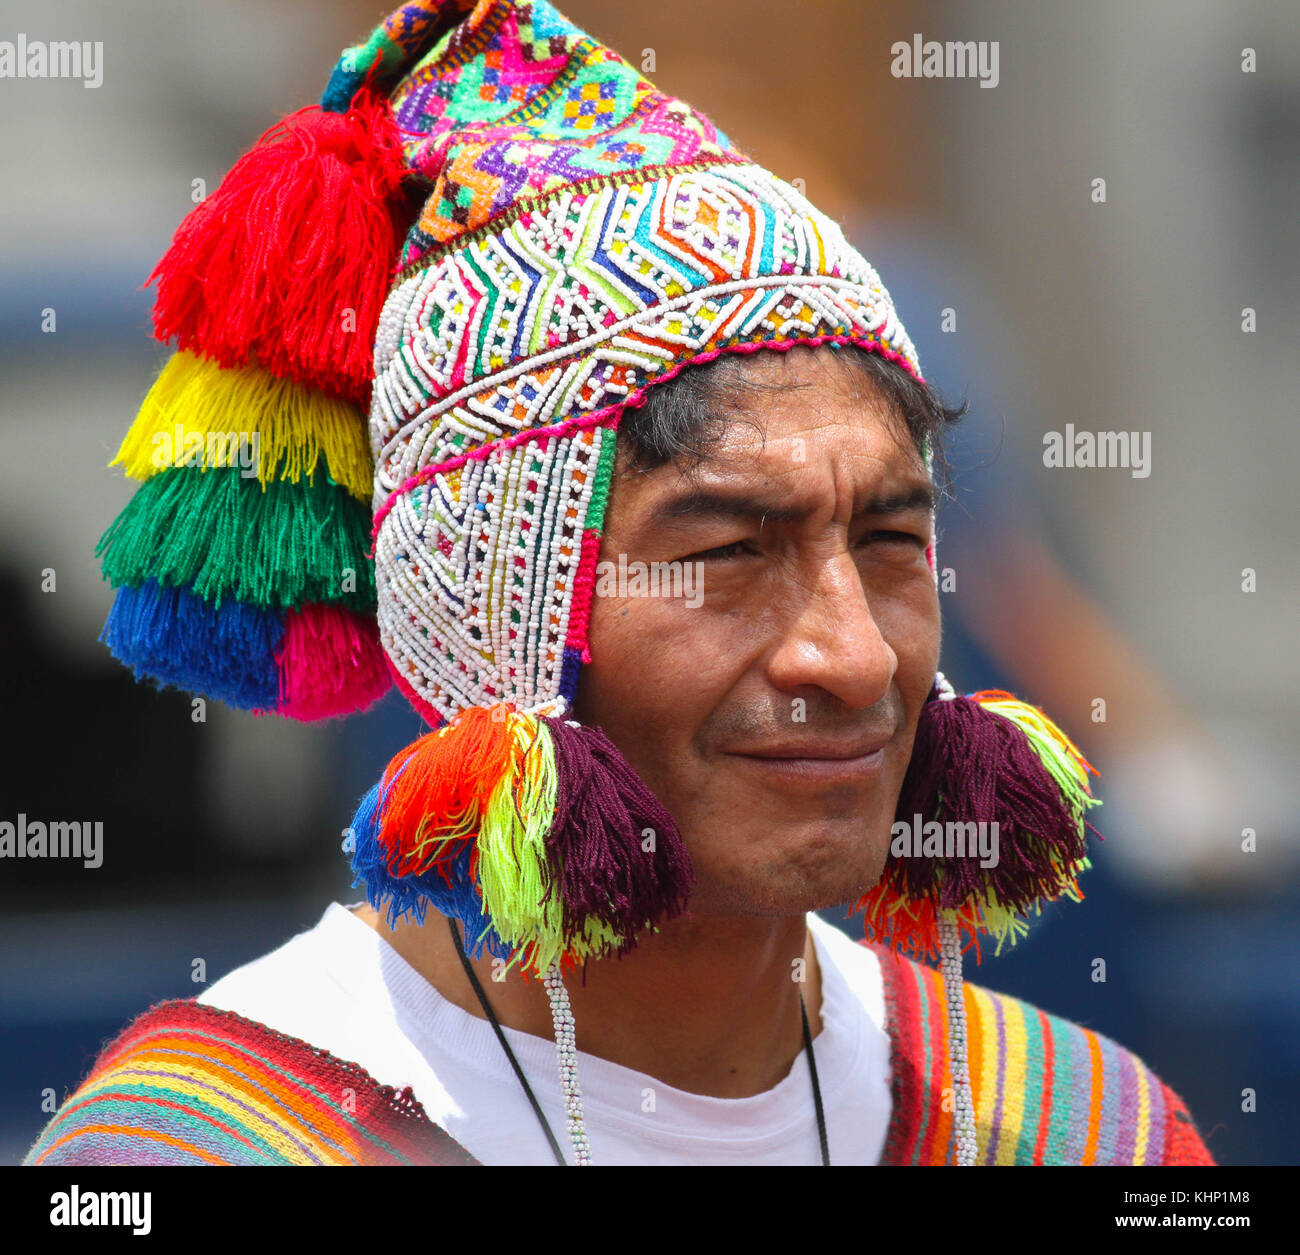 Man in costume at a street carnival in Lima, Peru Stock Photo